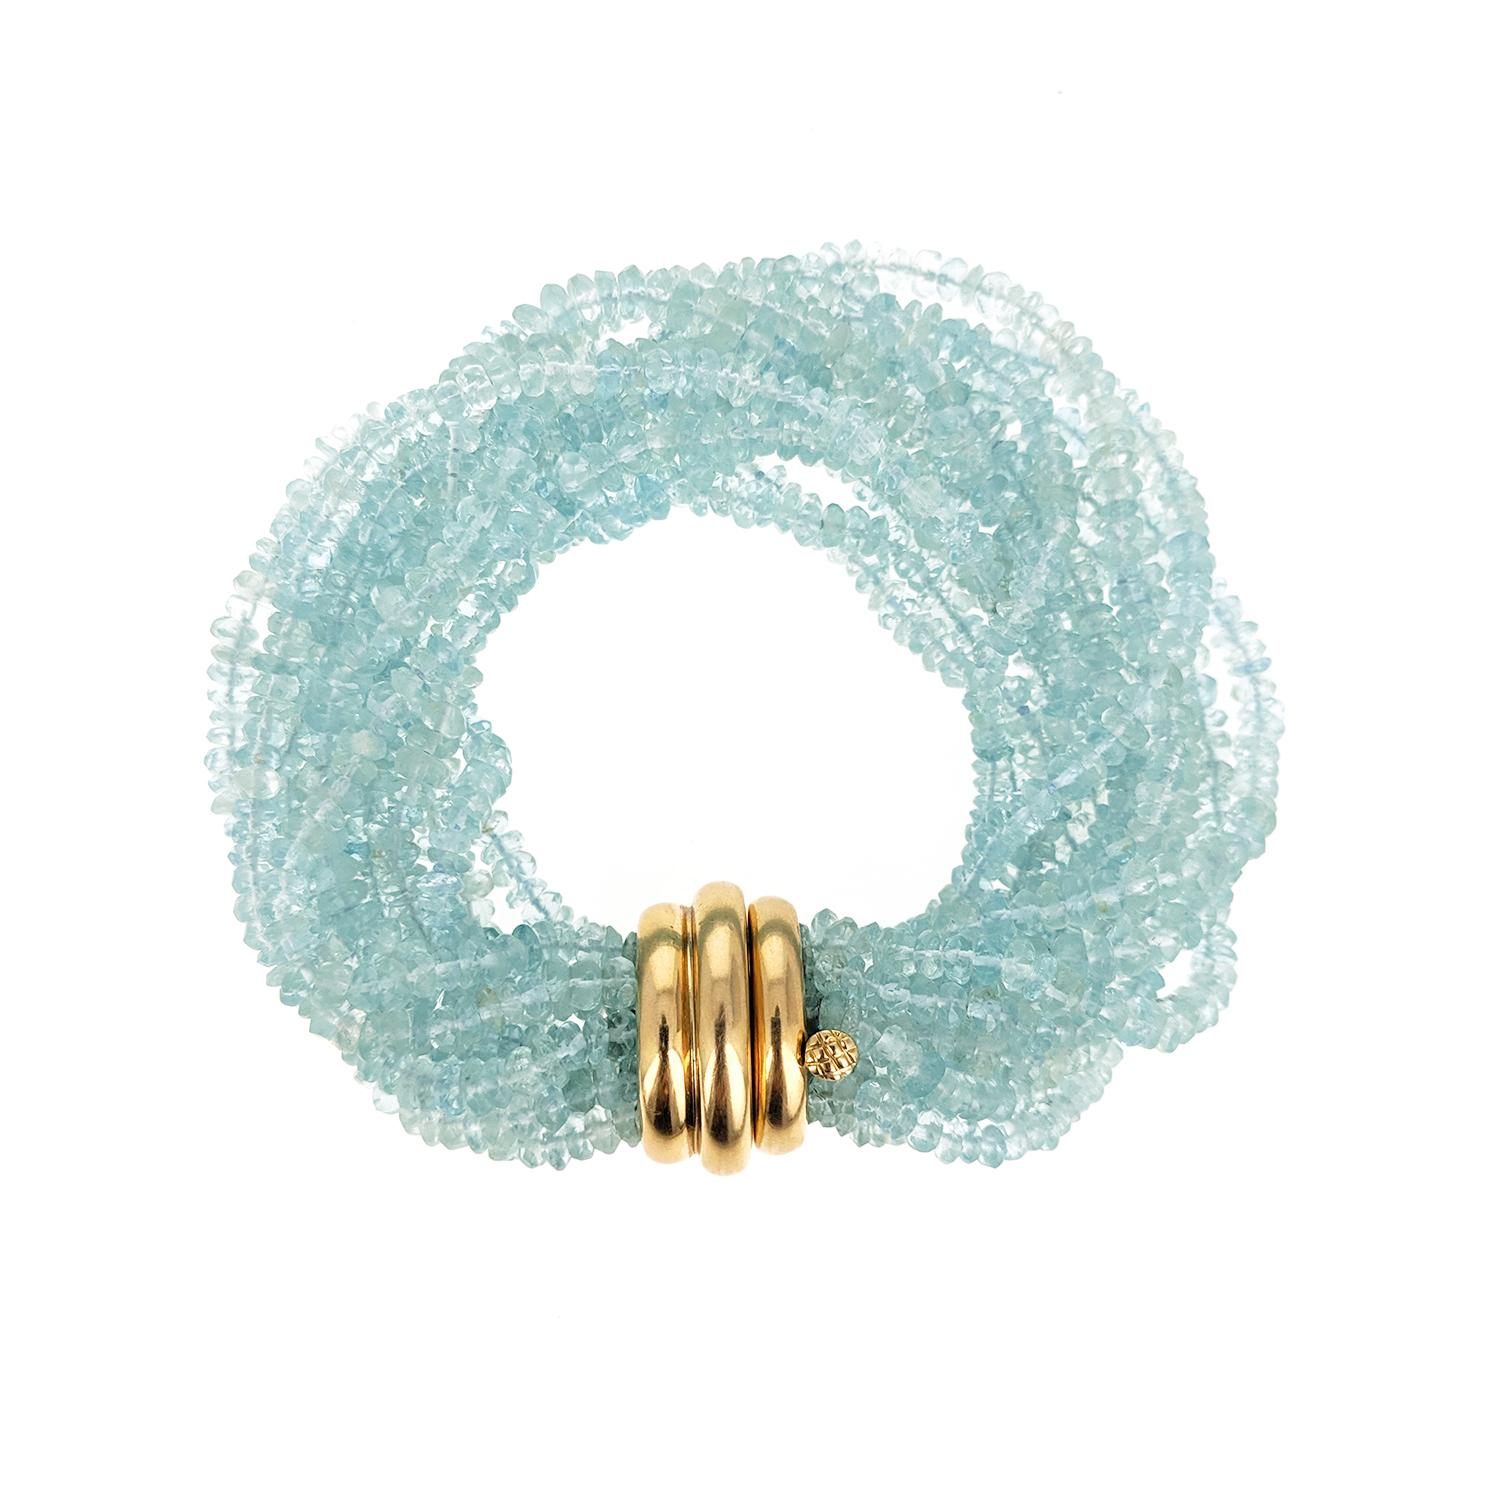 The beautiful bracelet is made of thirteen strands of faceted aquamarine beads and has a polished 18 karat yellow gold bombe clasp. It can be worn twisted or not, depending on the size of your wrist. It is signed Verdura and made in 2004. 8.5 inches